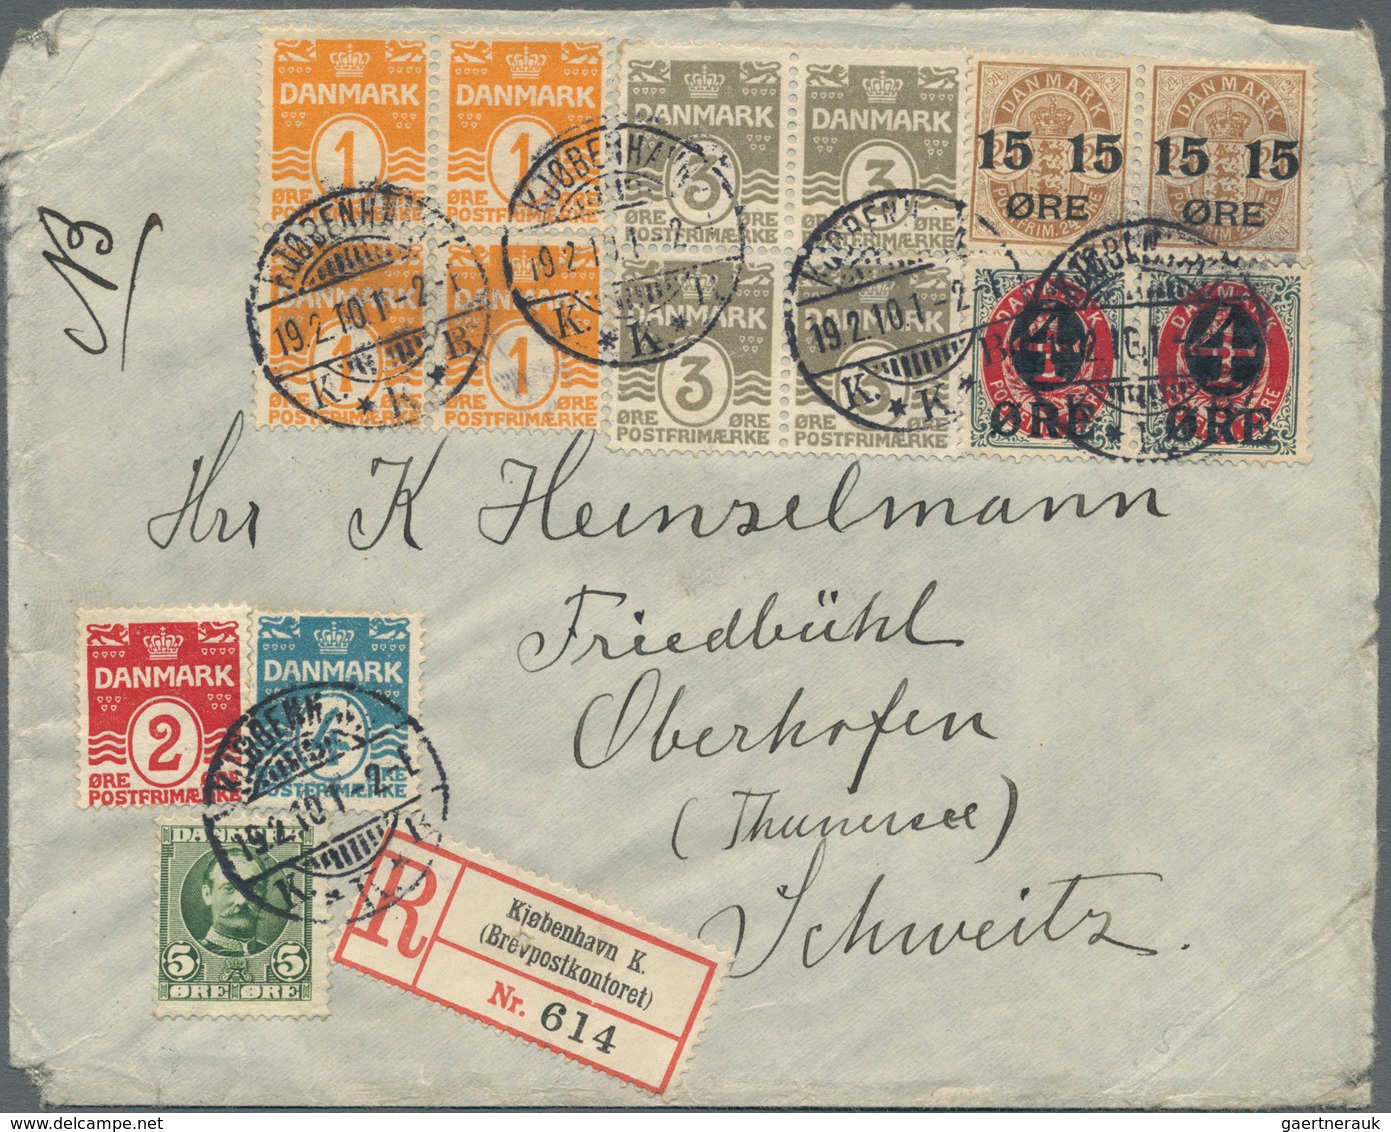 Dänemark: 1905-30 NUMERALS: Specialized collection of thousands of stamps, mint and used, multiples